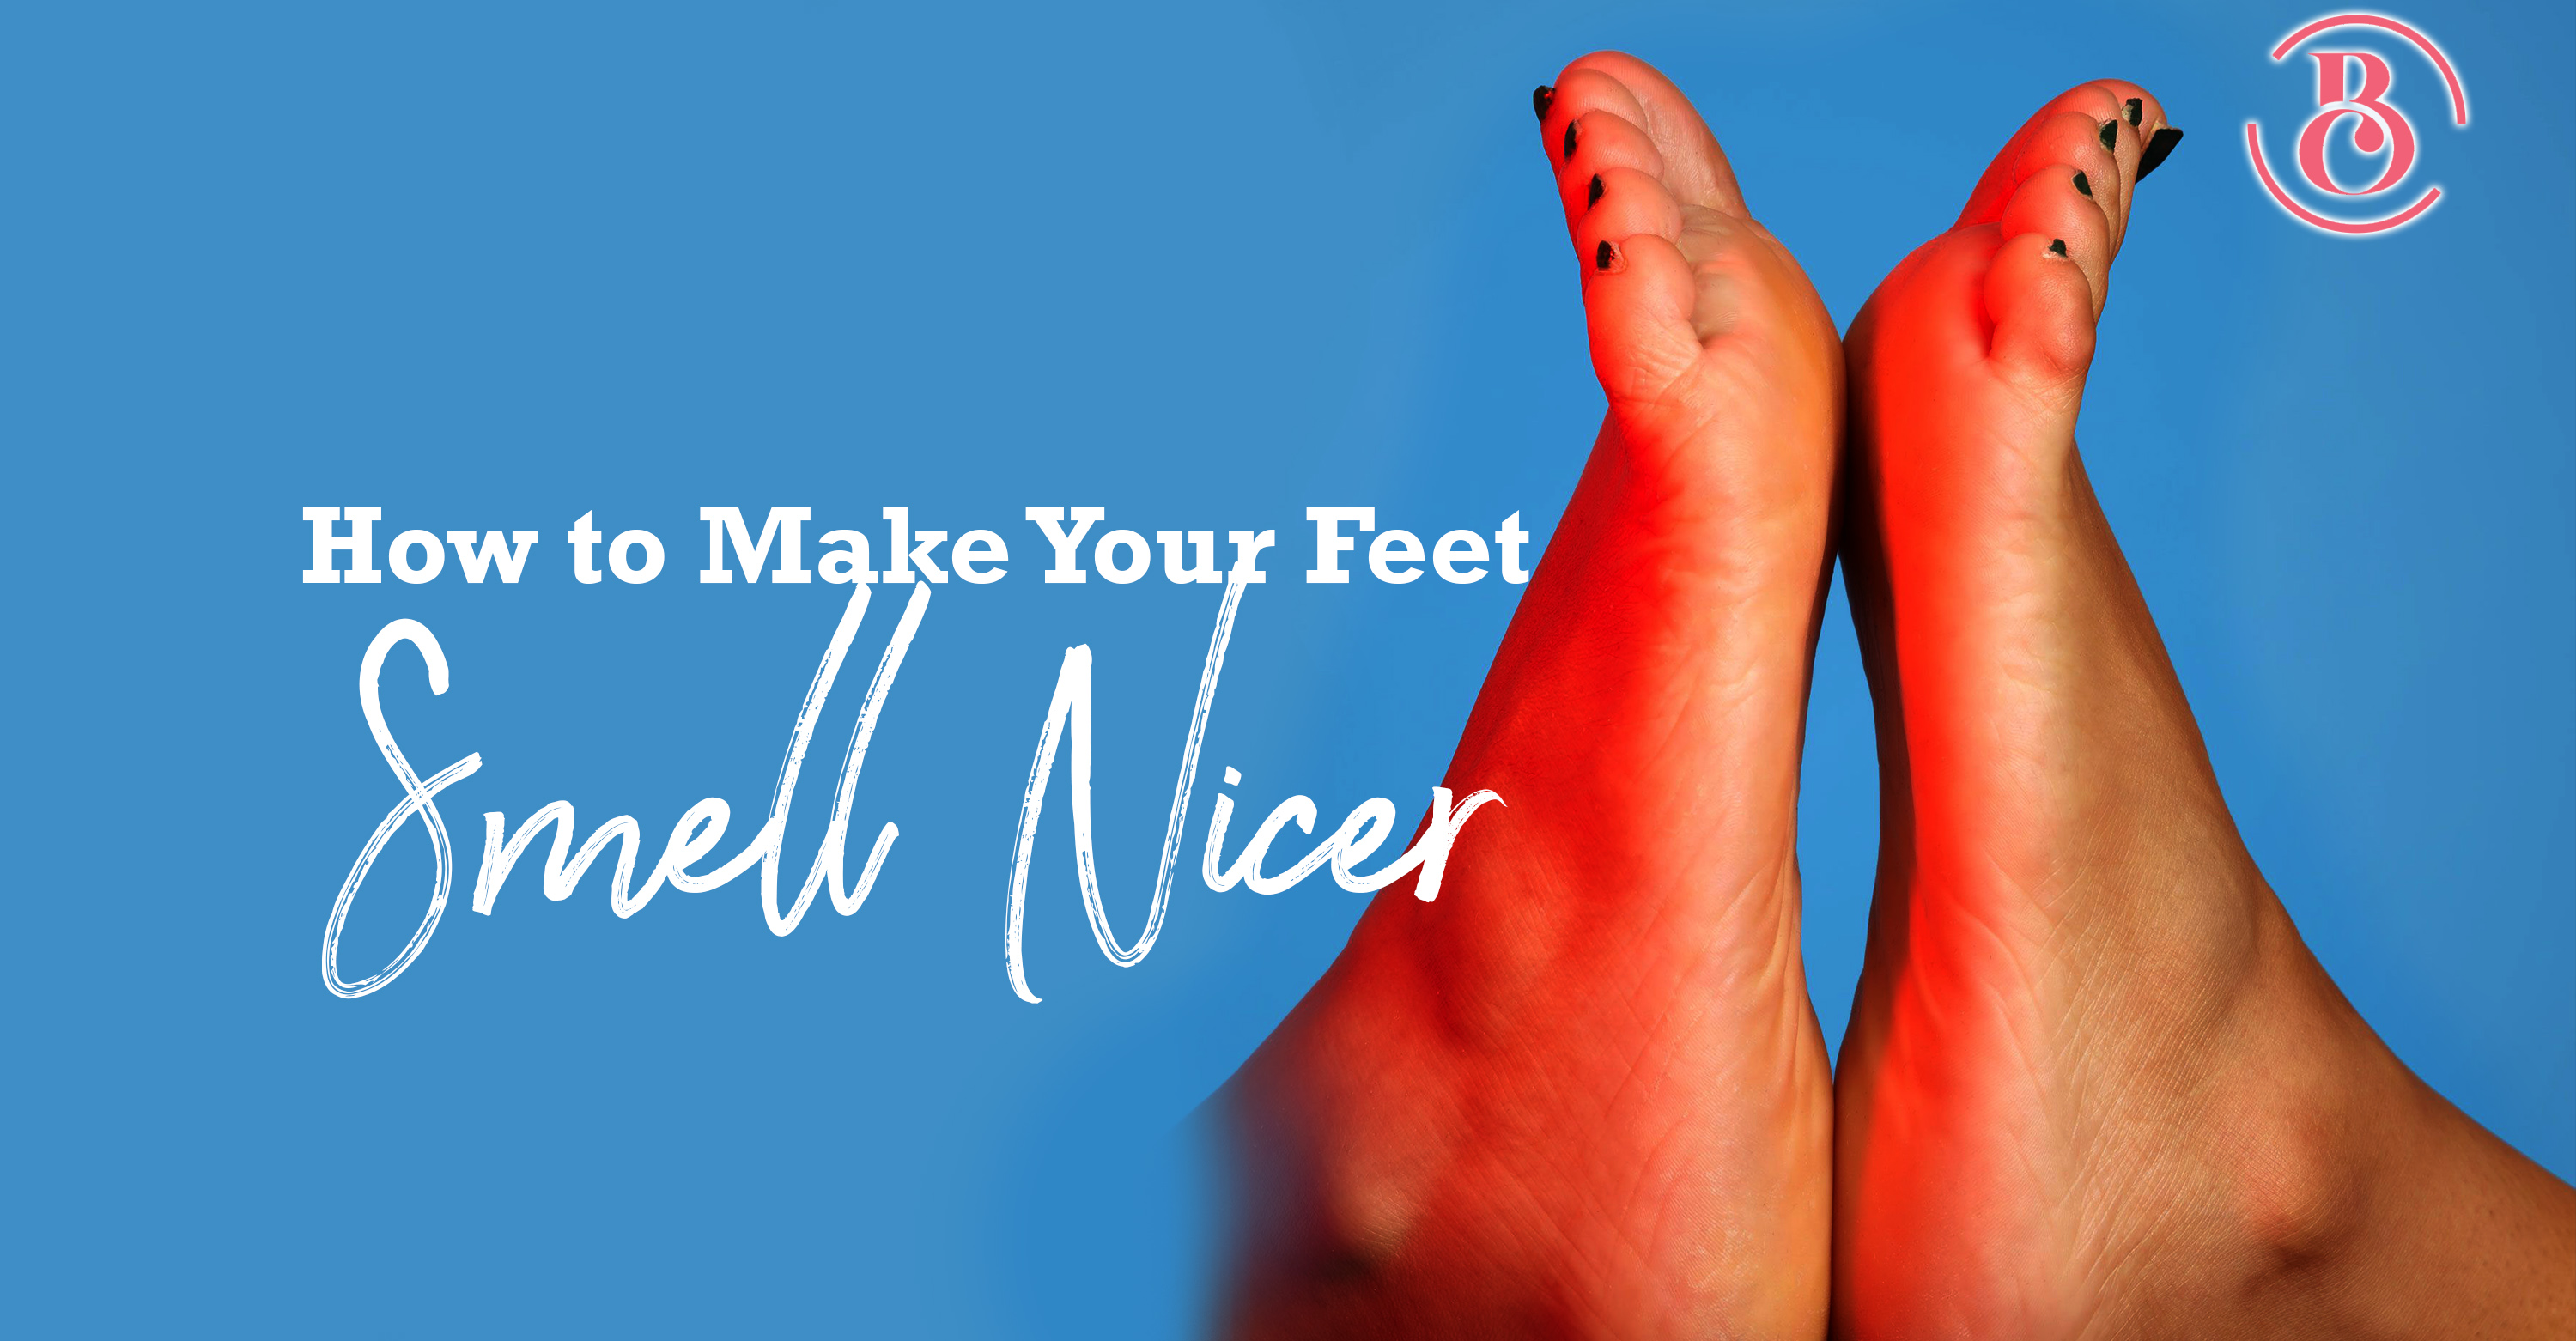 Got Smelly Feet? 12 Tips to Make Your Feet Smell Nicer